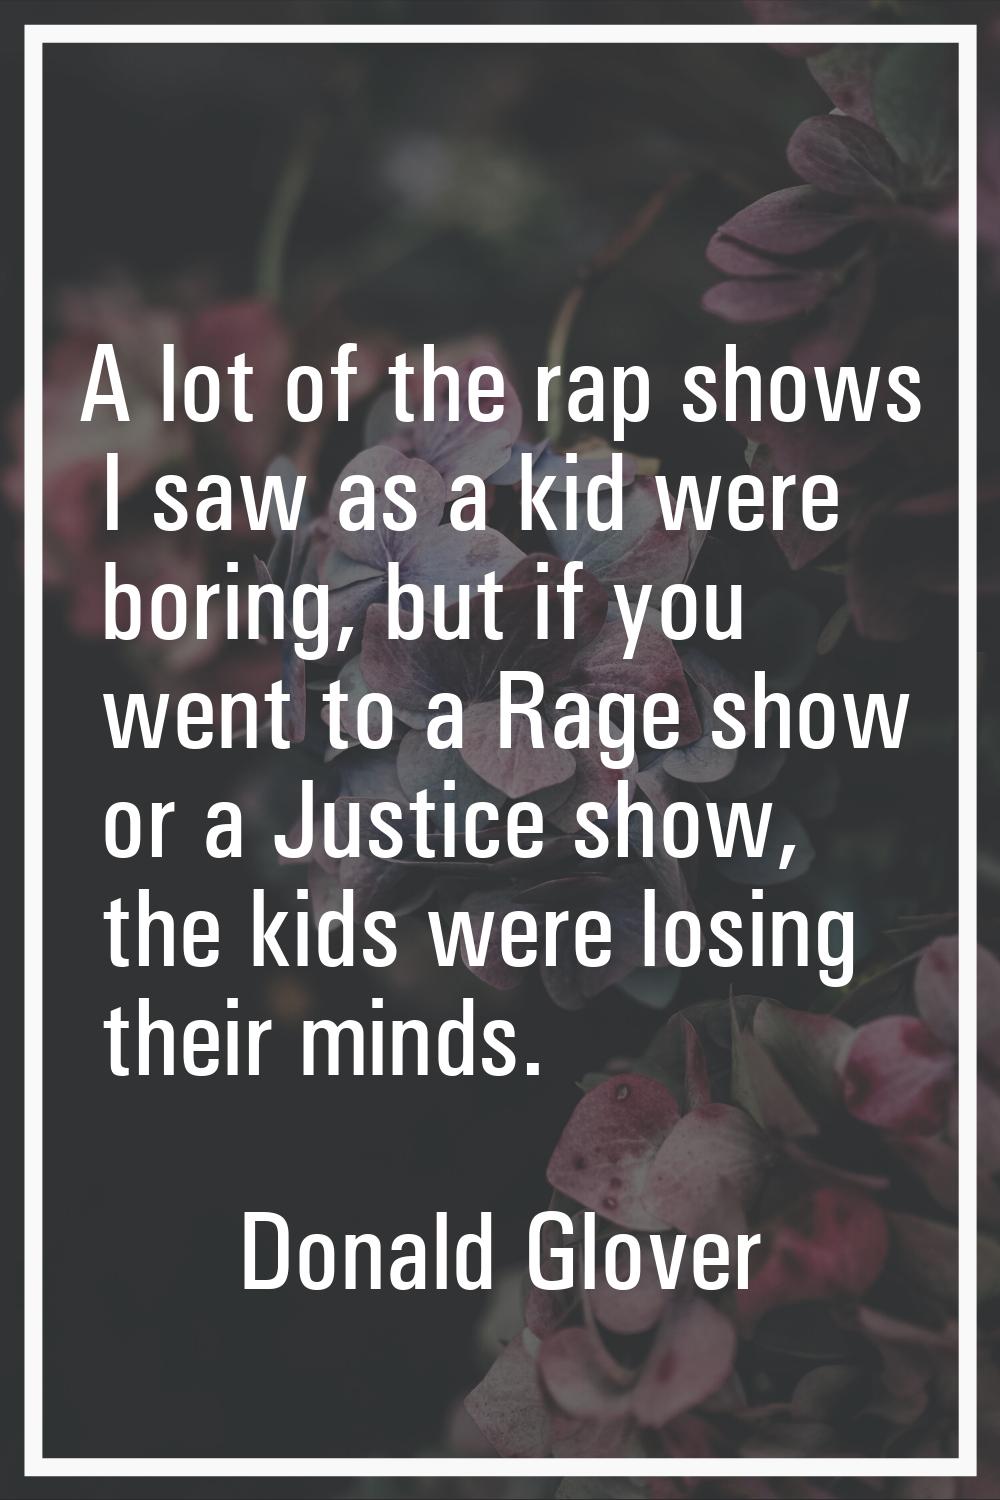 A lot of the rap shows I saw as a kid were boring, but if you went to a Rage show or a Justice show